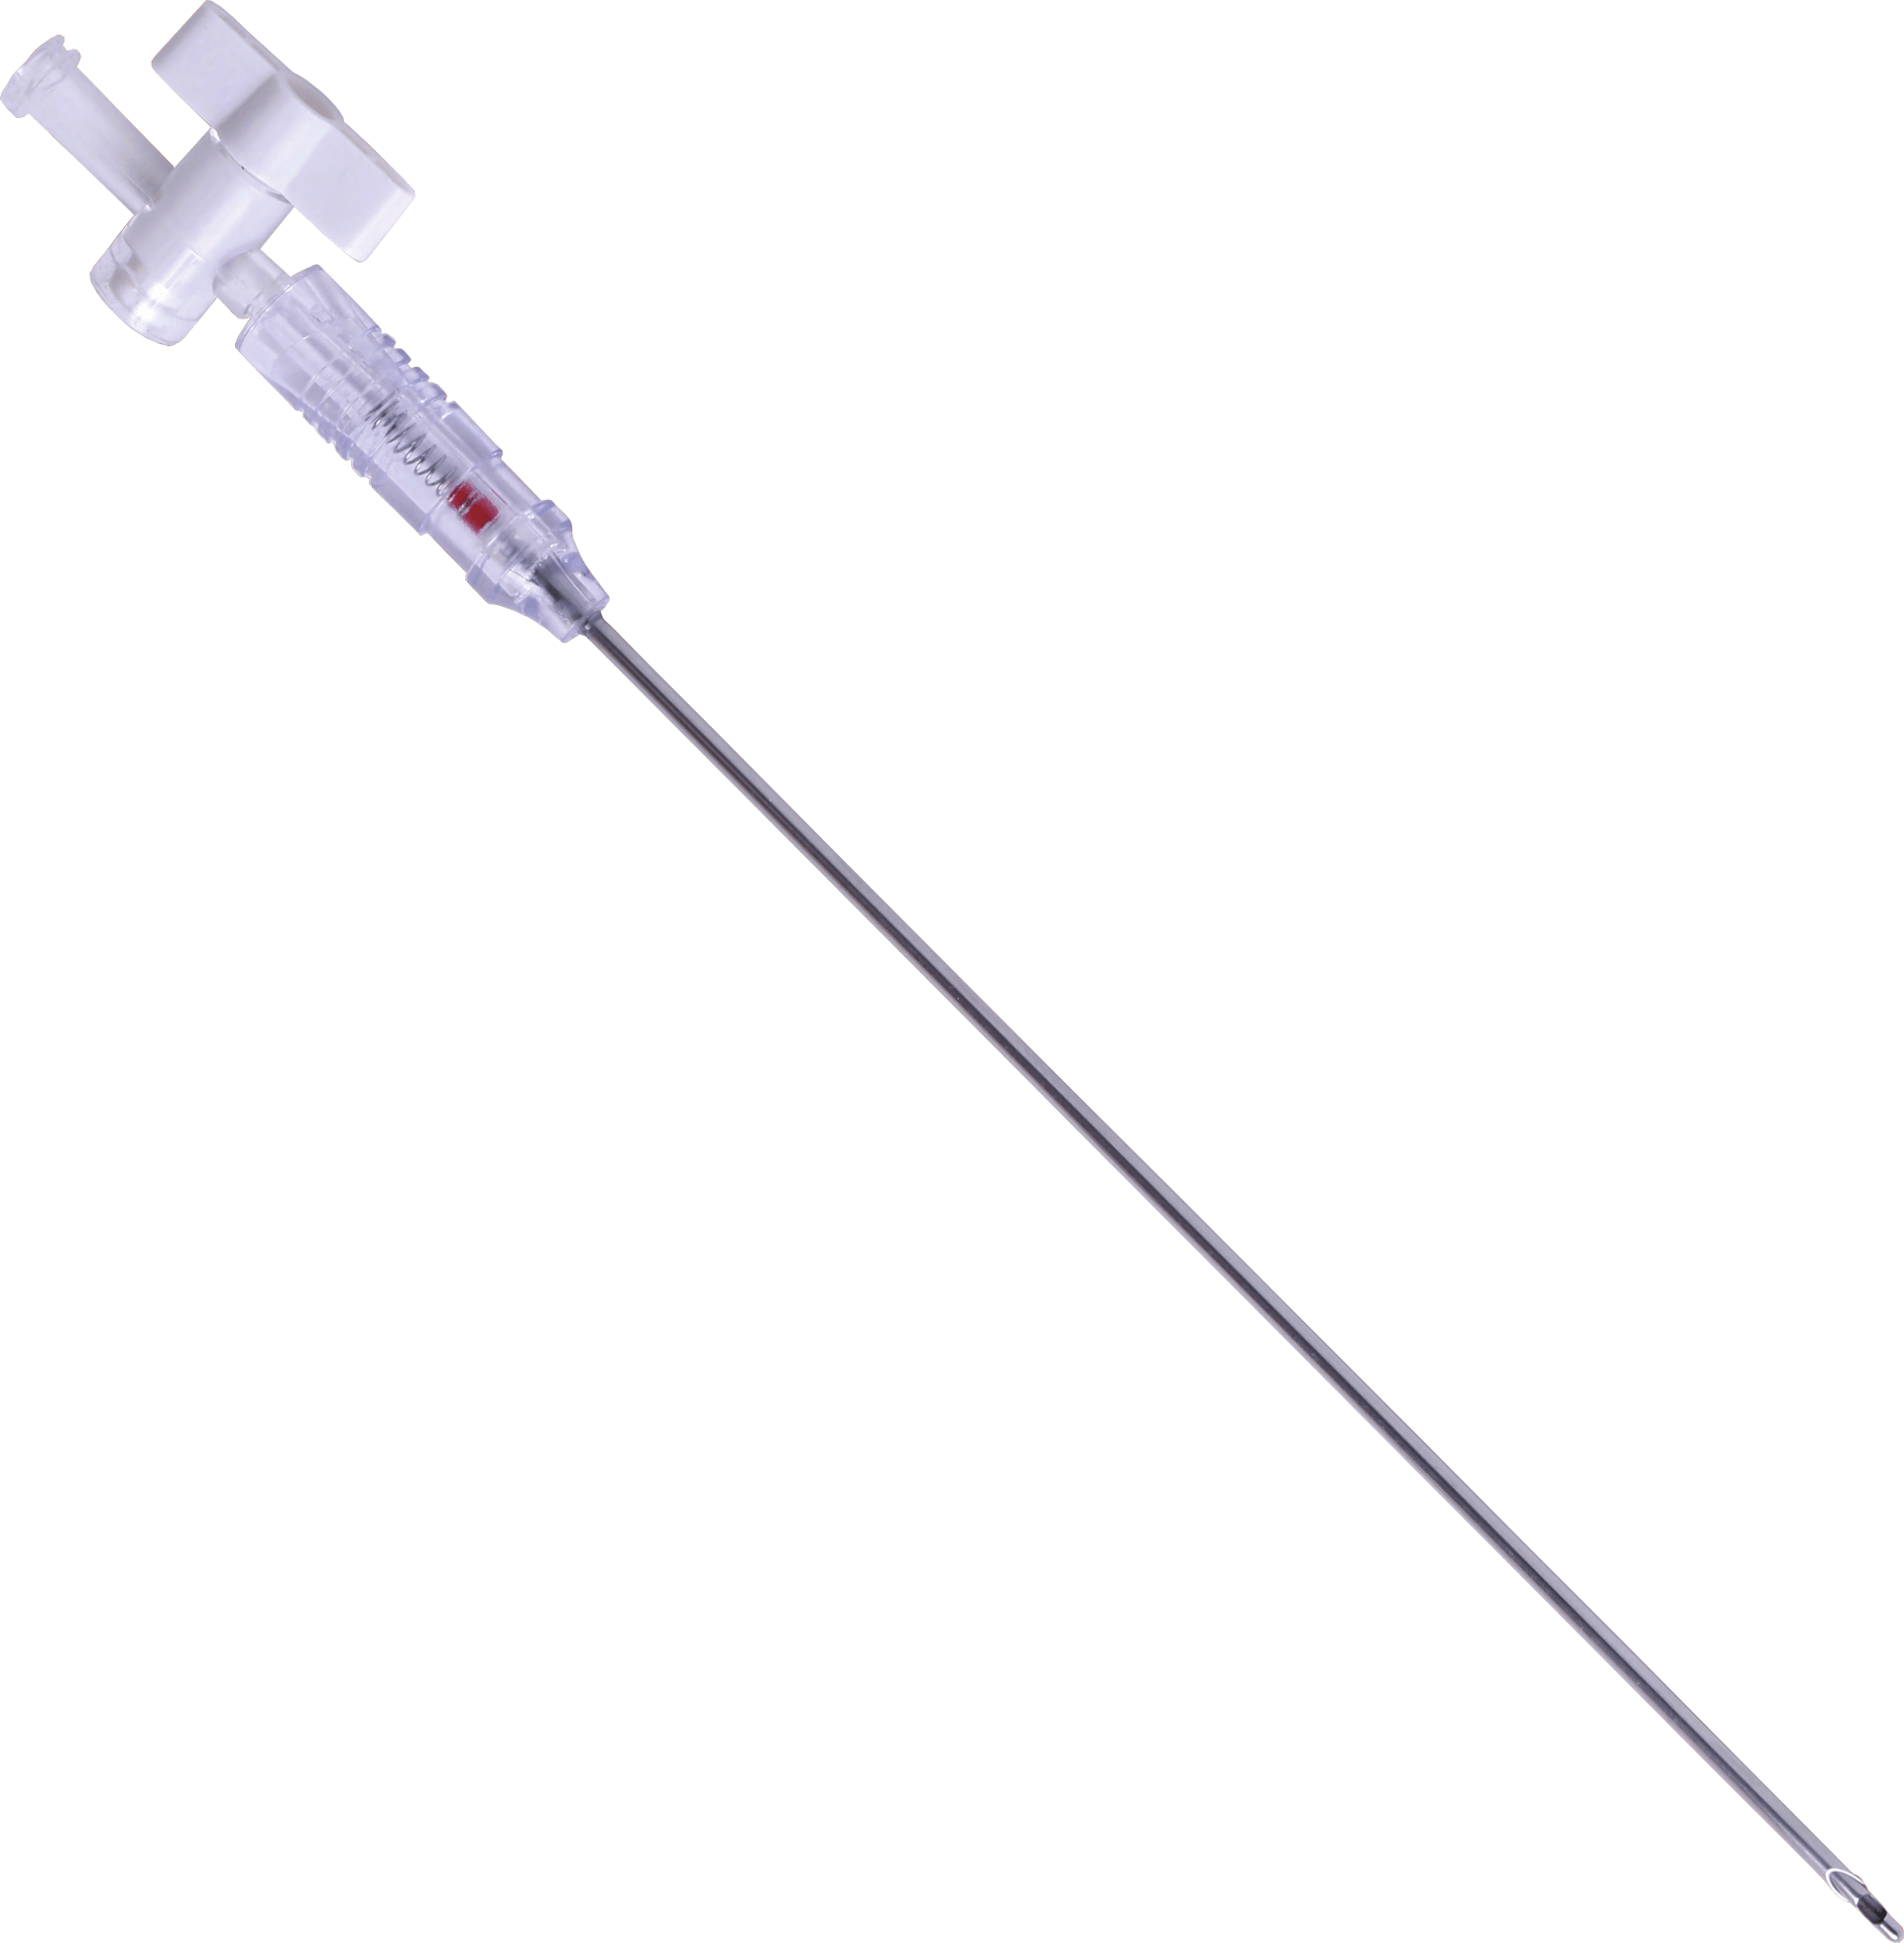 Locamed Veress needle, for insufflation